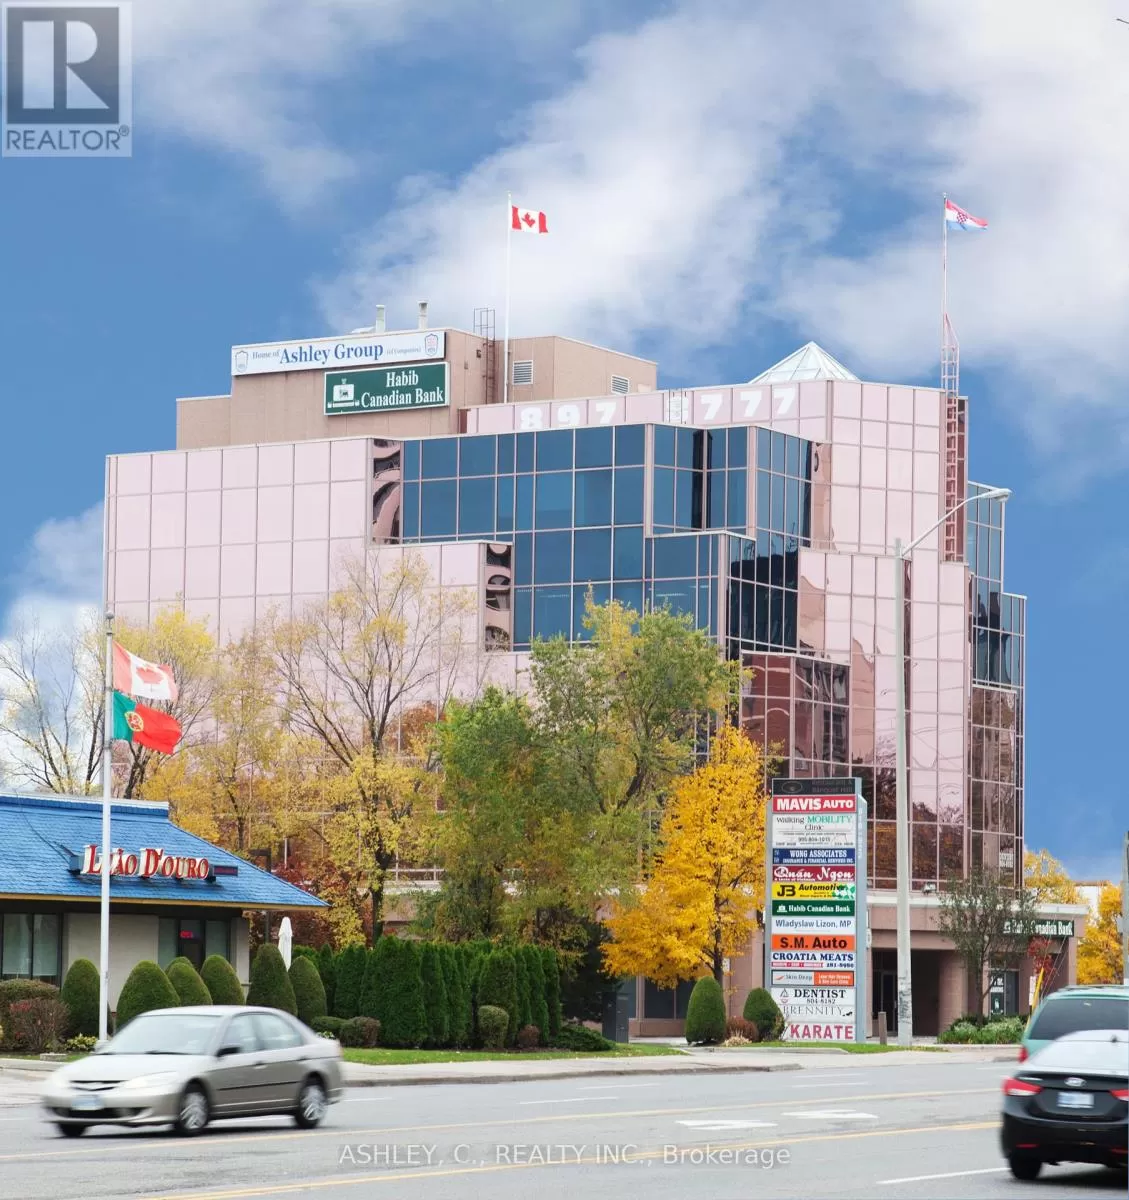 Offices for rent: 400 - 918 Dundas Street E, Mississauga, Ontario L4Y 4H9